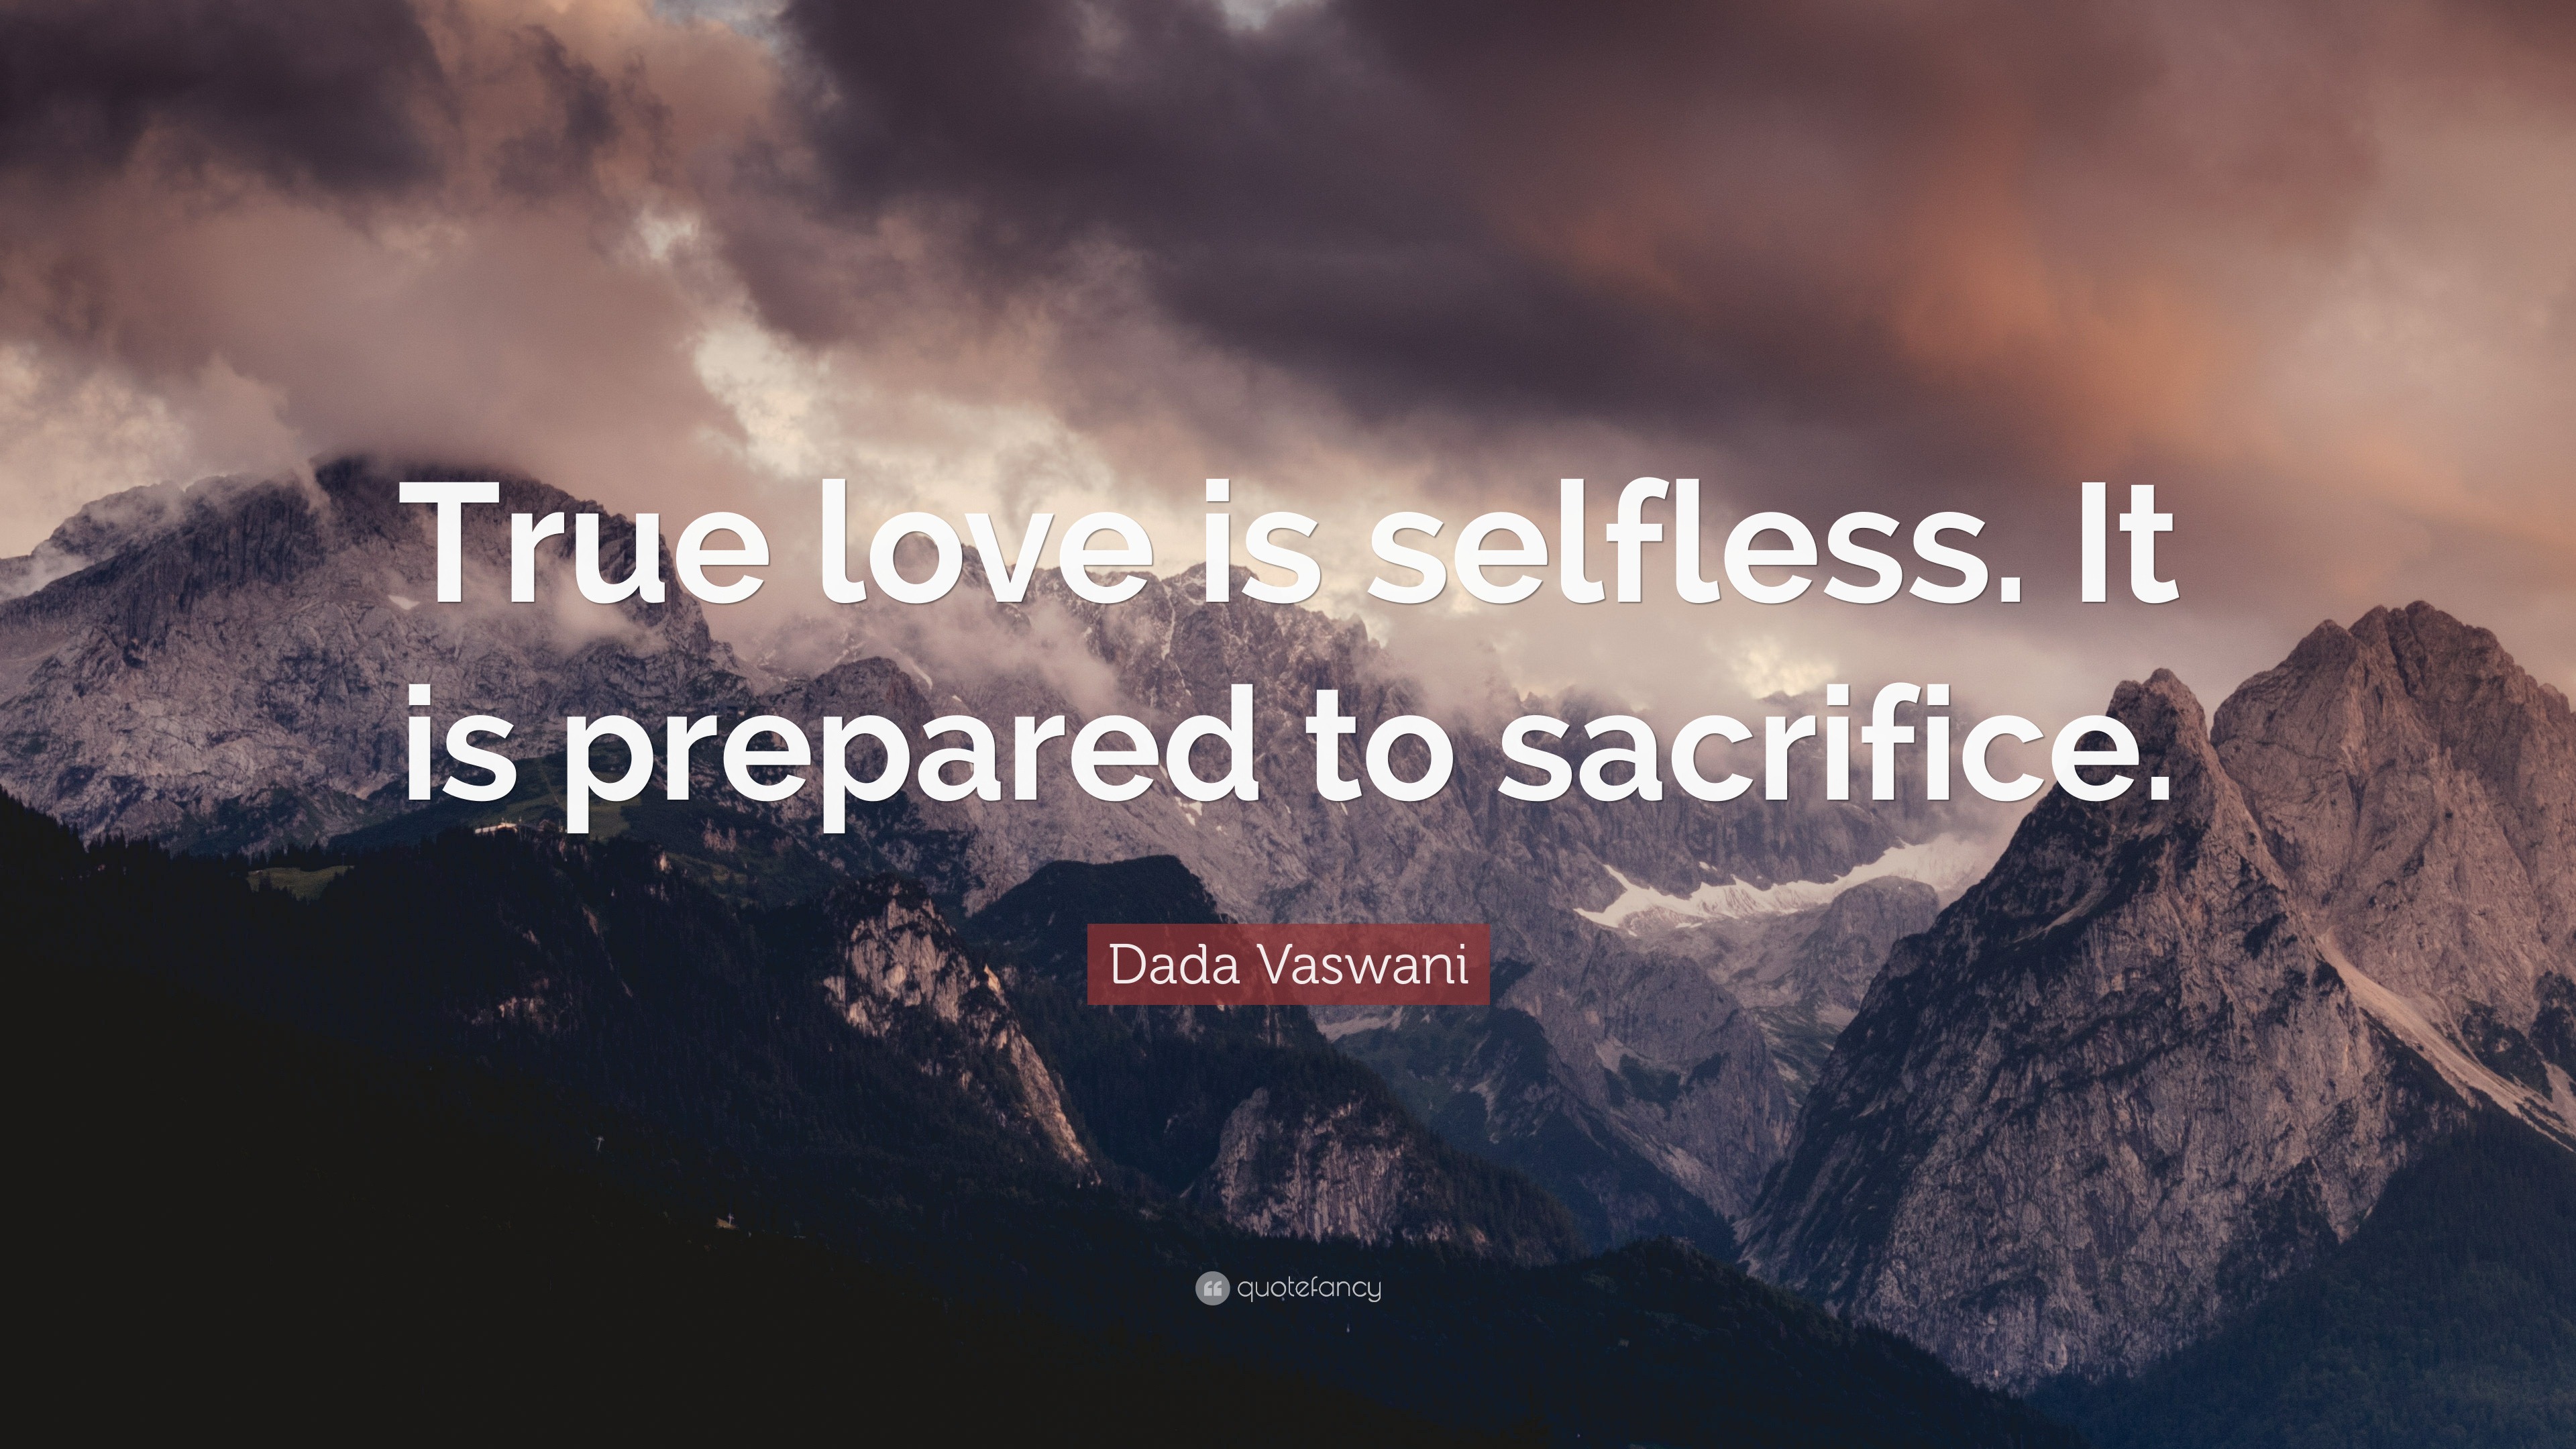 10 Quotes On True Love and Sacrifice | Thousands of Inspiration Quotes ...